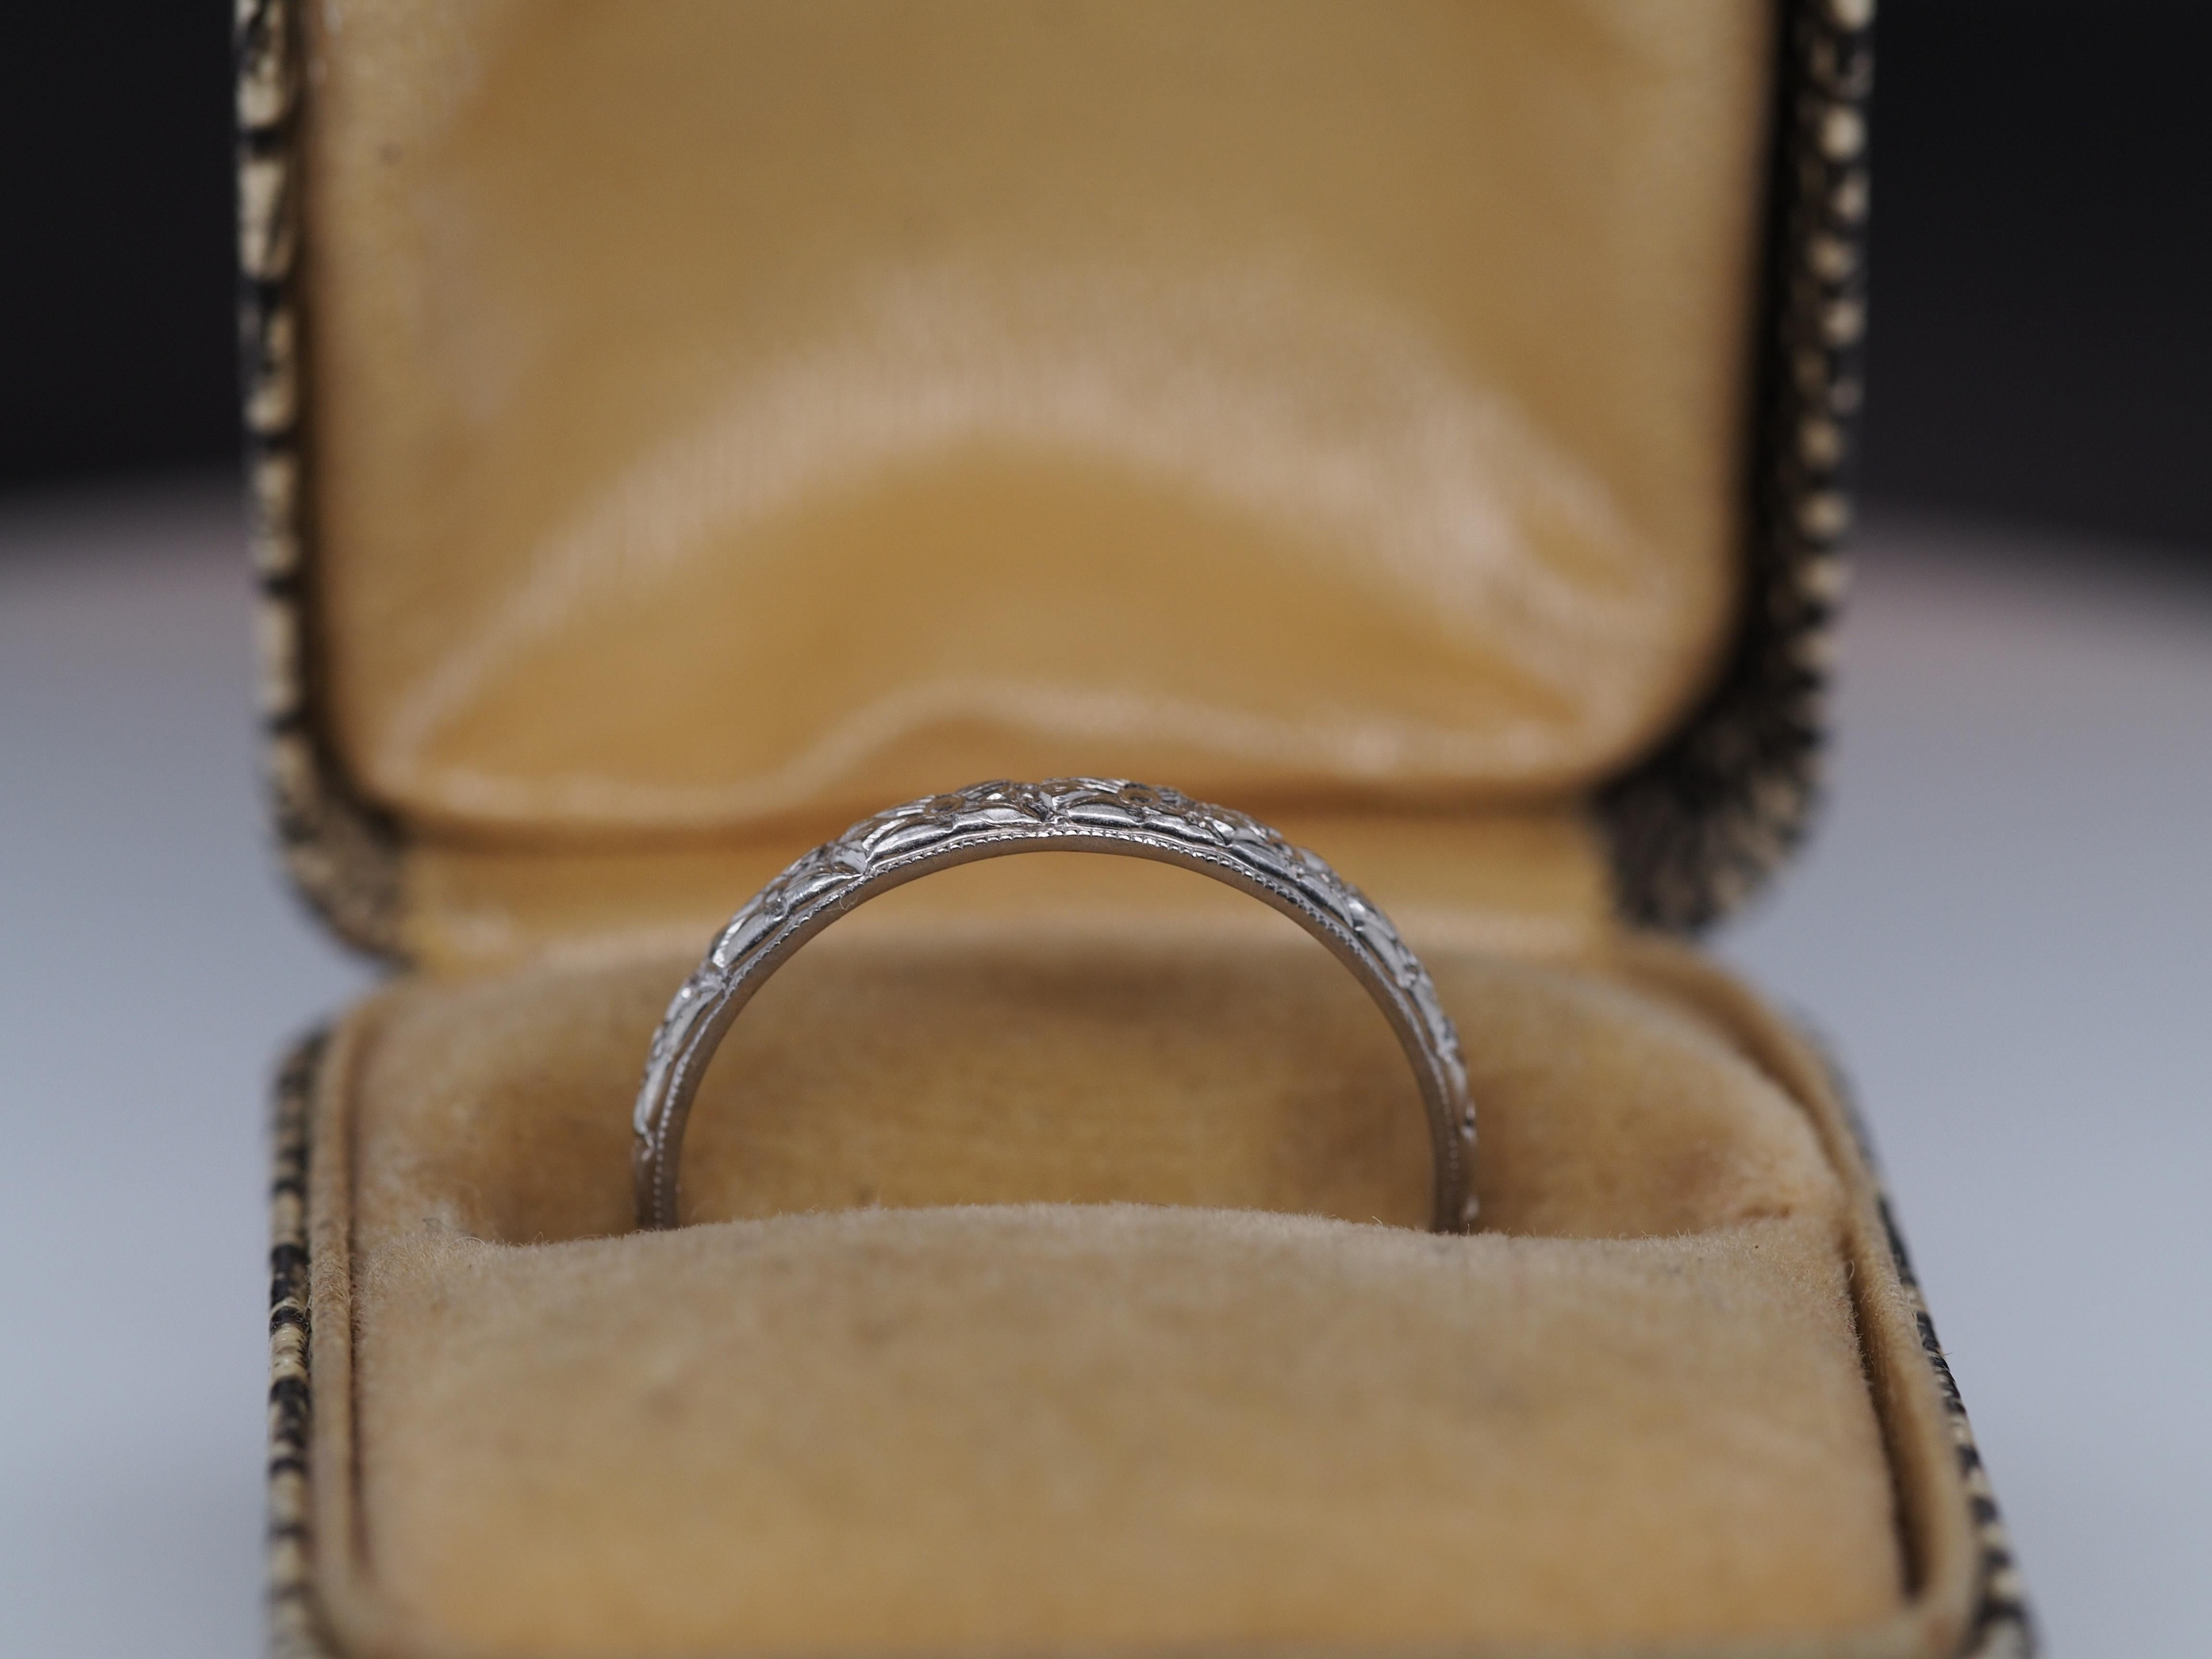 Item Details:
Ring Size: 6.25
Metal Type: 14k White Gold [Hallmarked, and Tested]
Weight: 1.4 grams
Band Width: 2.1mm
Condition: Excellent